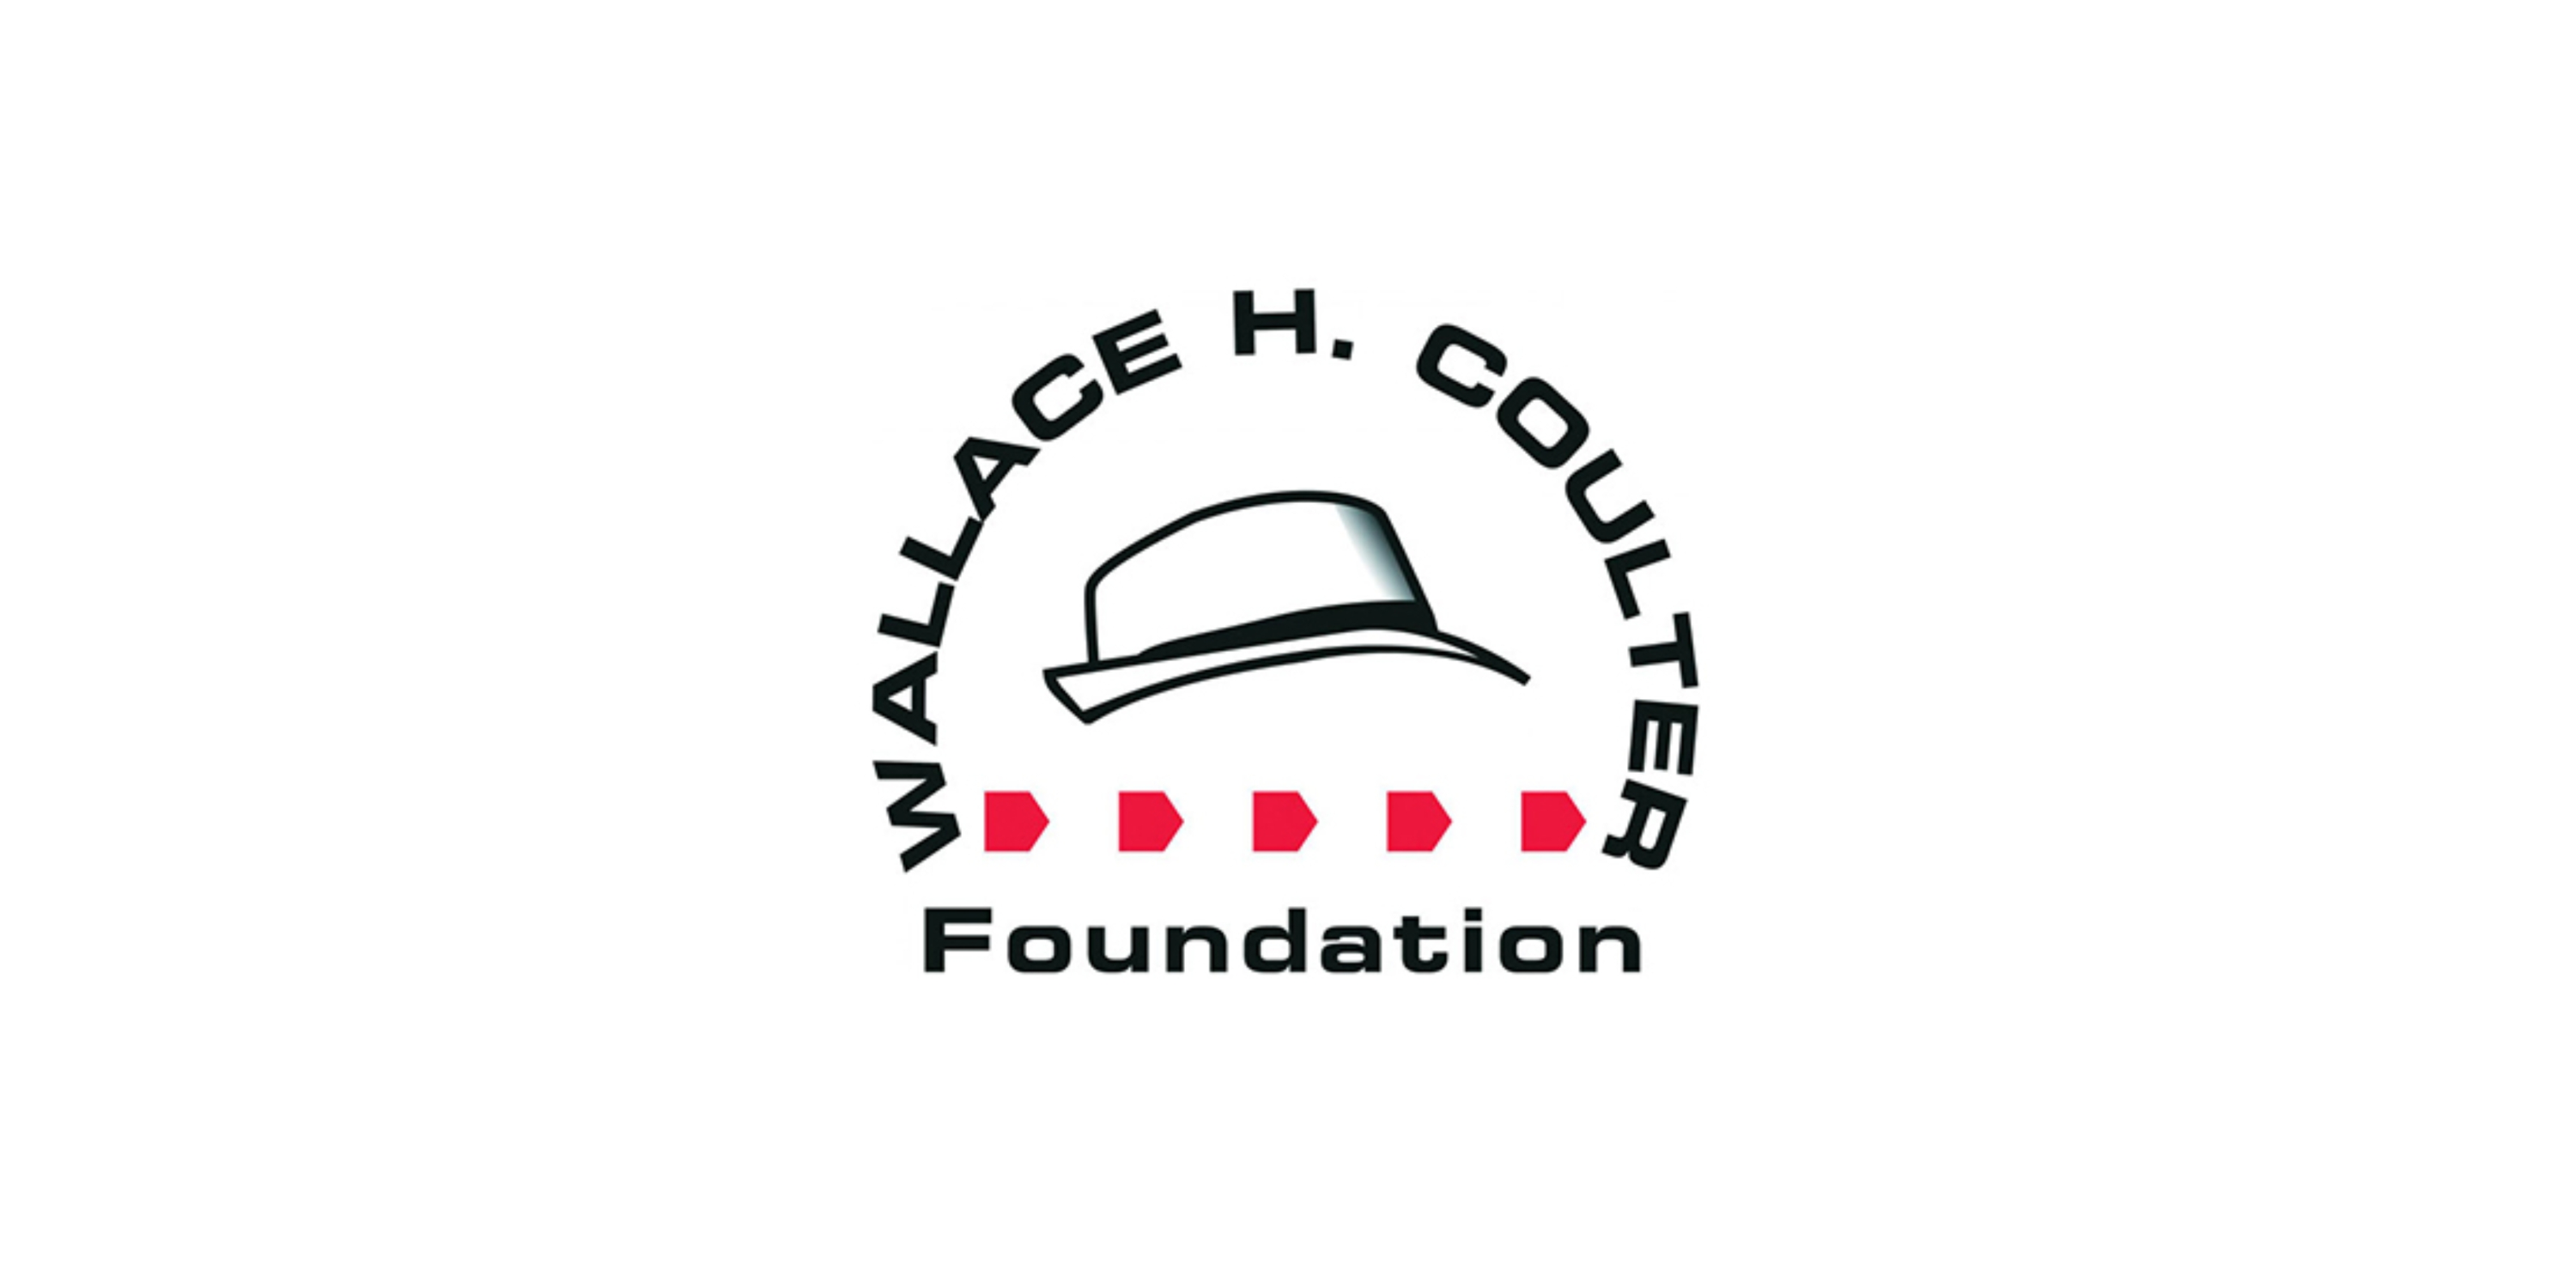 Wallace Coulter Foundation Logo for Birch Boys, $25,000 Grant Recipient